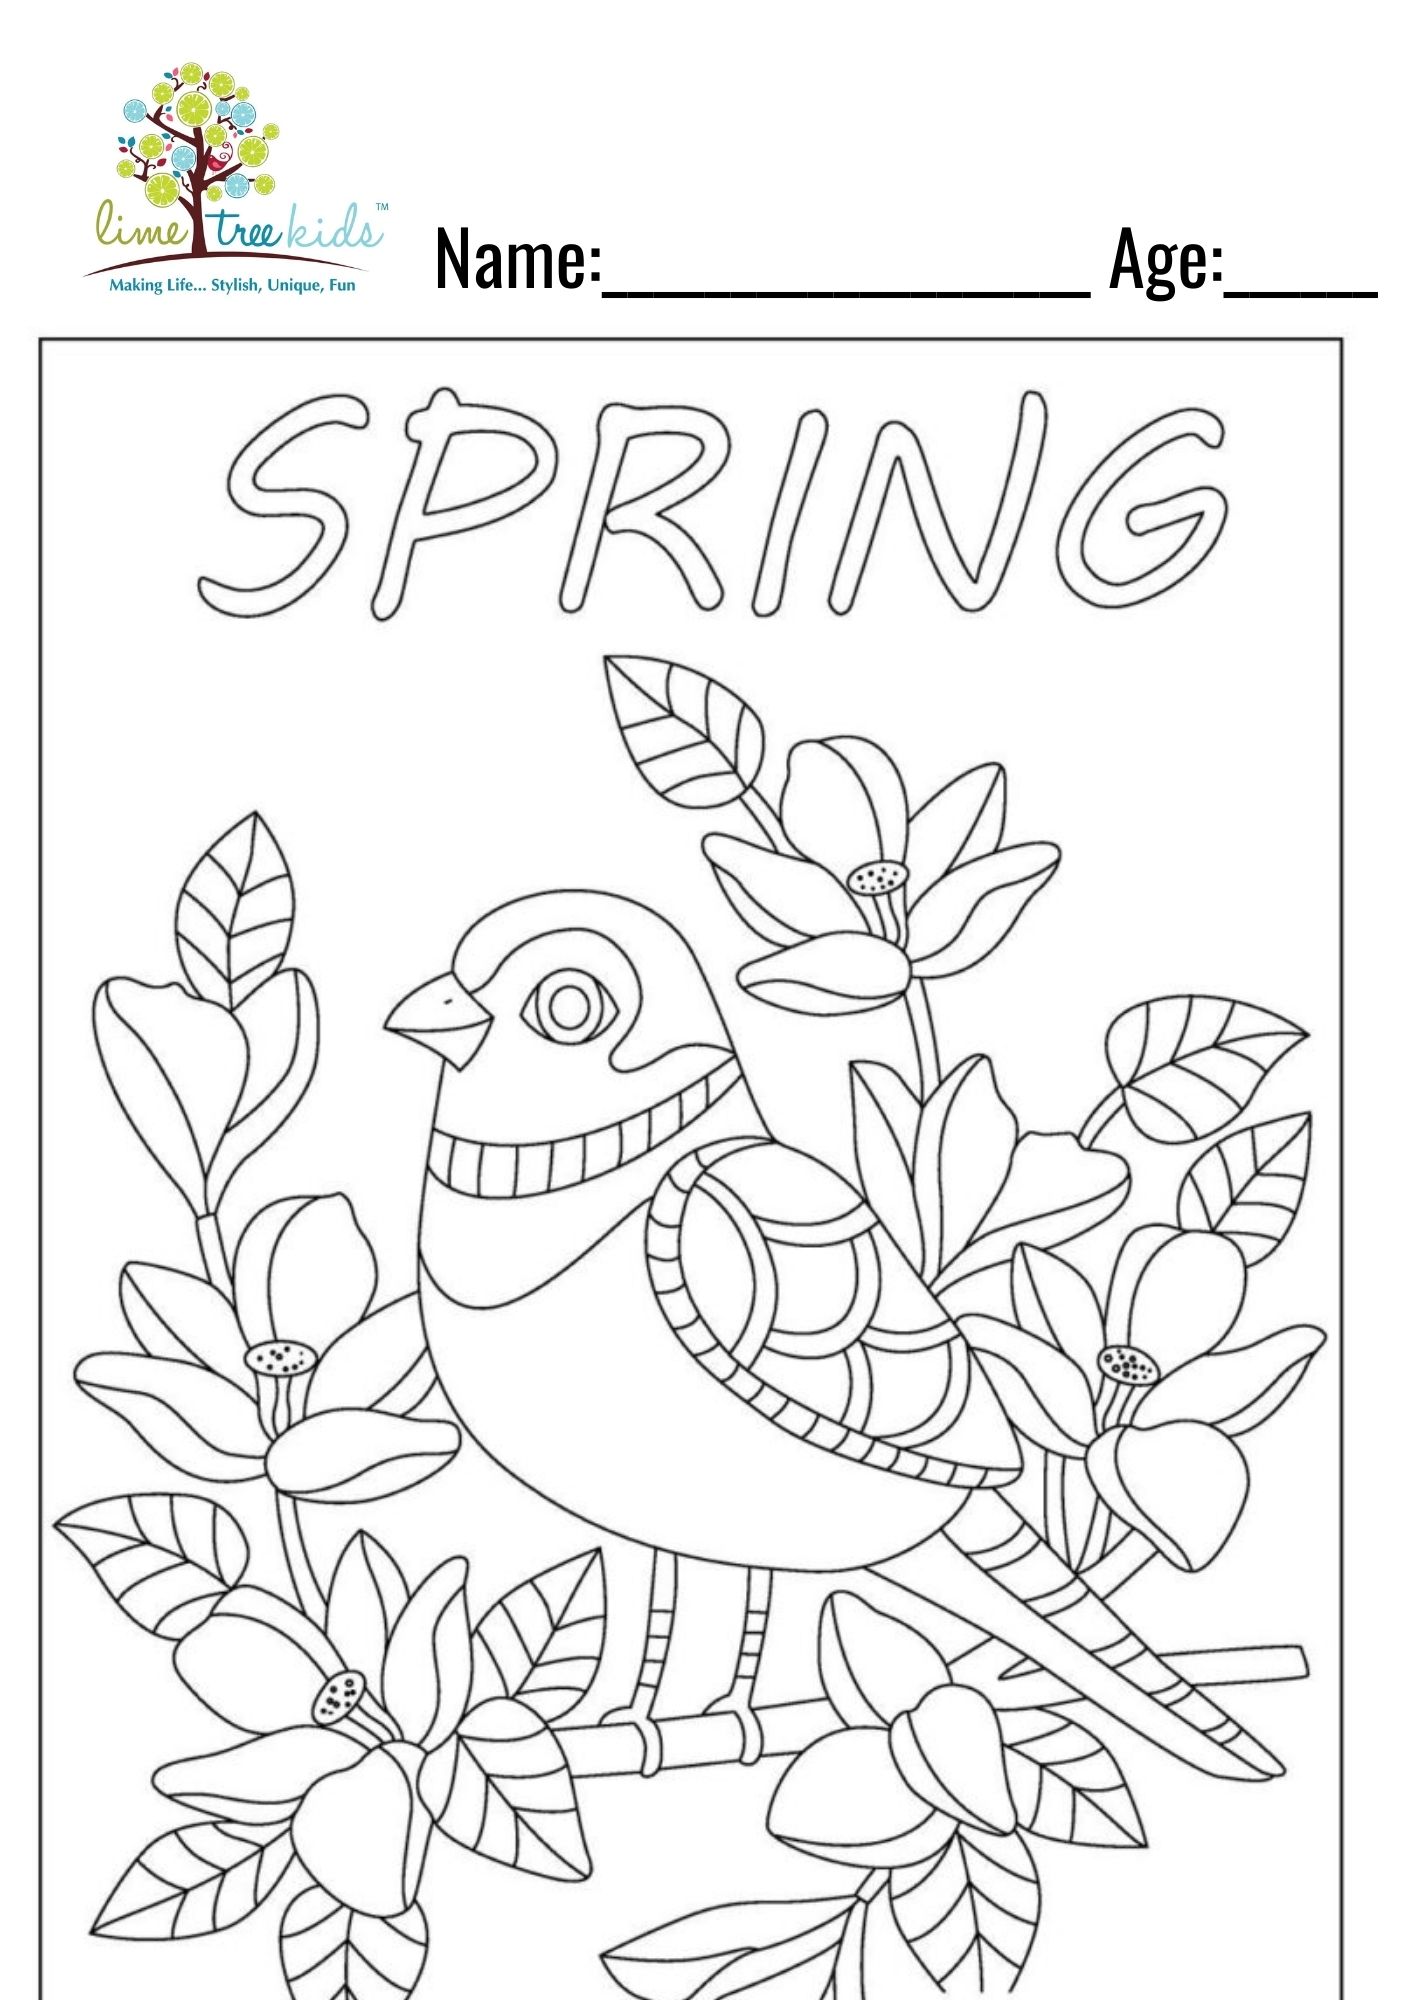 12+ Coloring Pages Belle